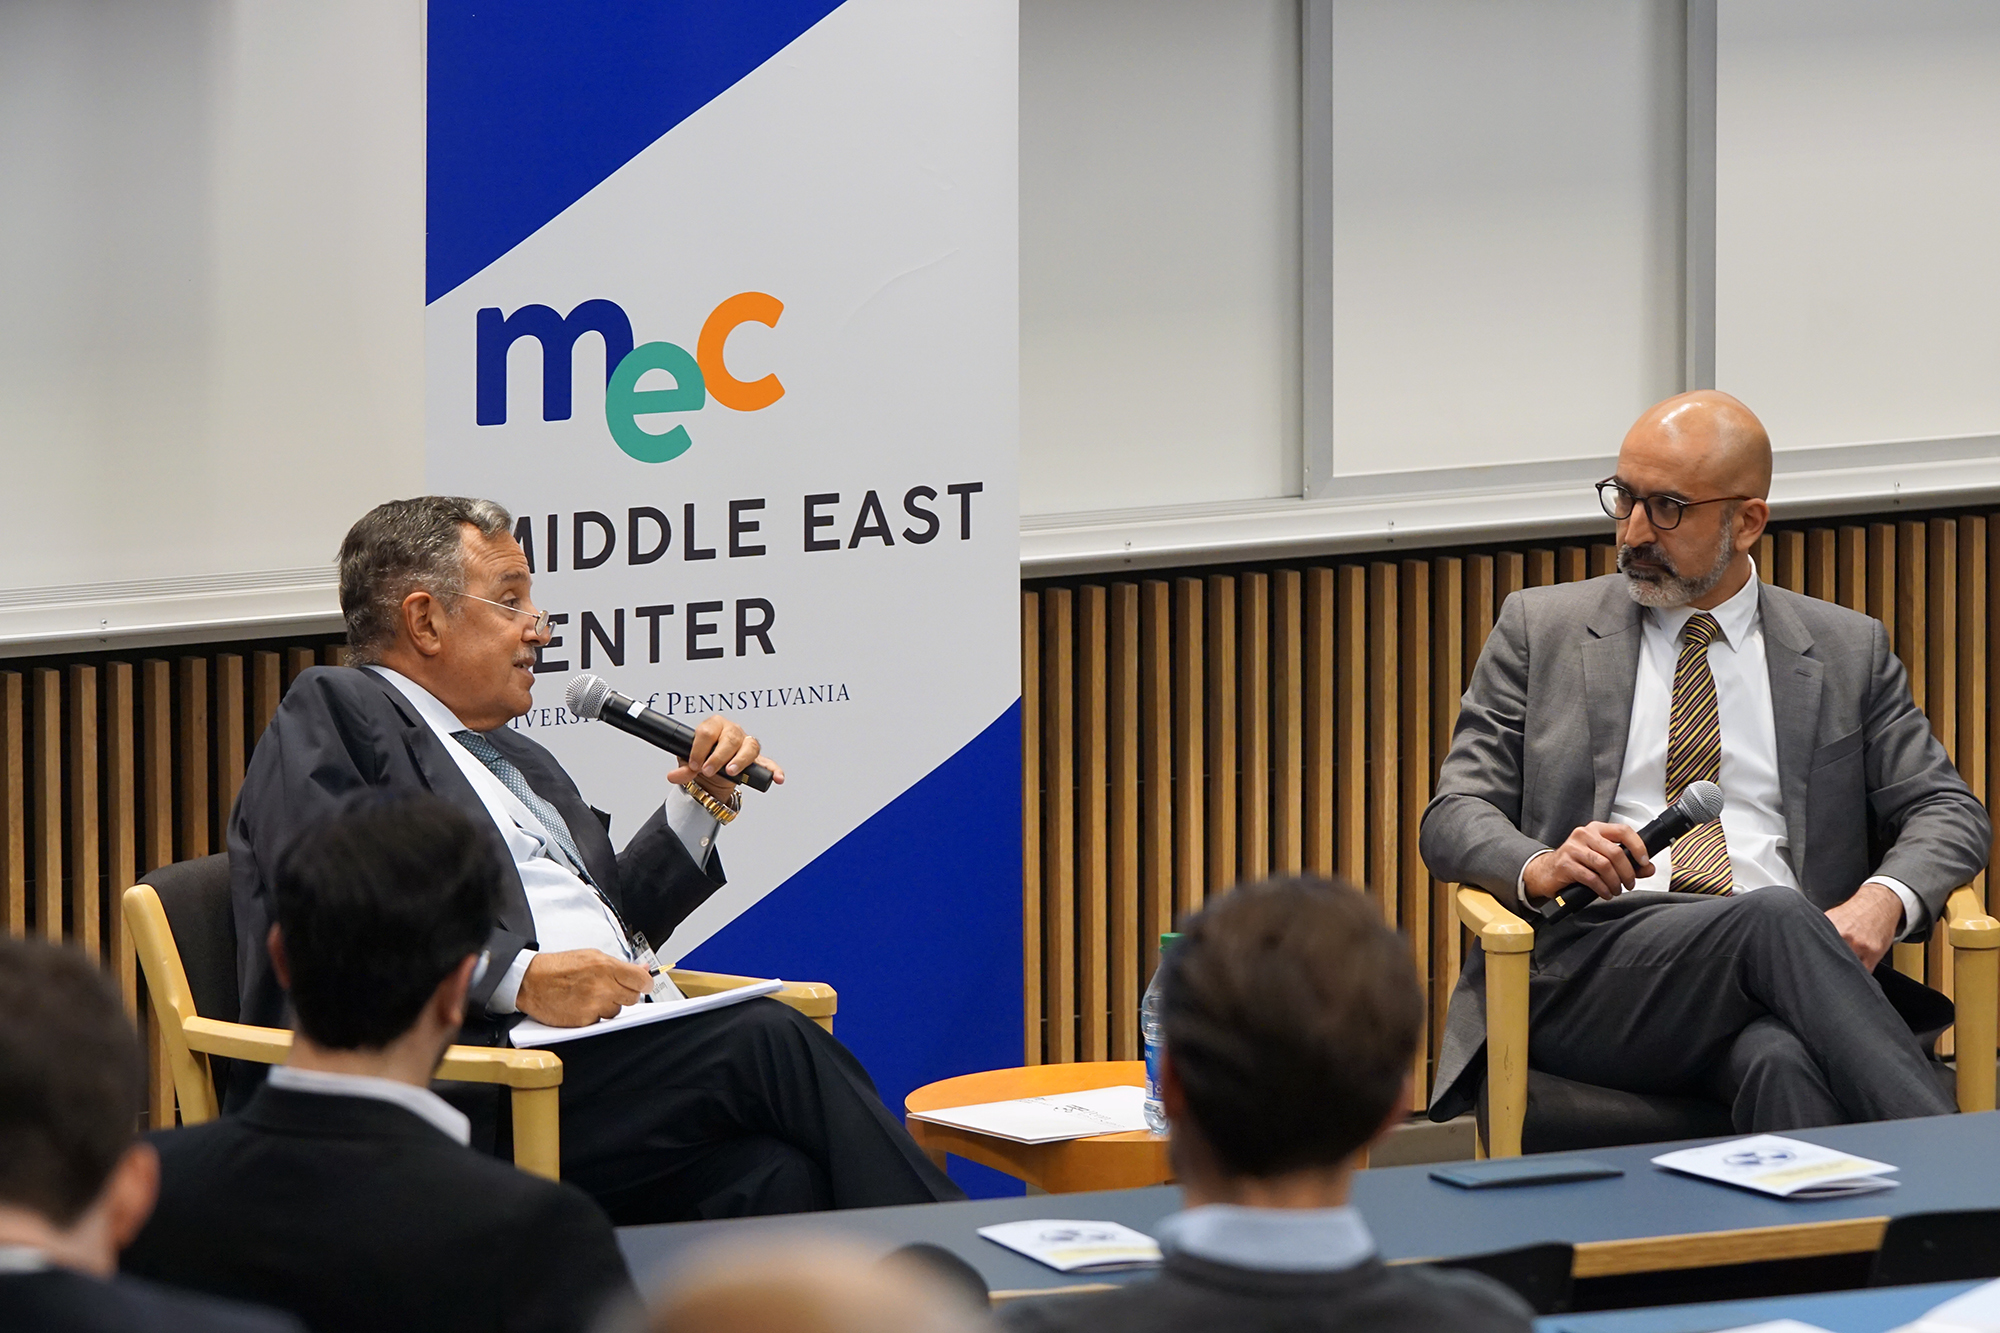 Nabil Fahmy sits in front of a sign reading Middle East Center, speaking into a microphone, as John Ghazvinian looks on, seated to Fahmy's left, the two separated by a low round side table.